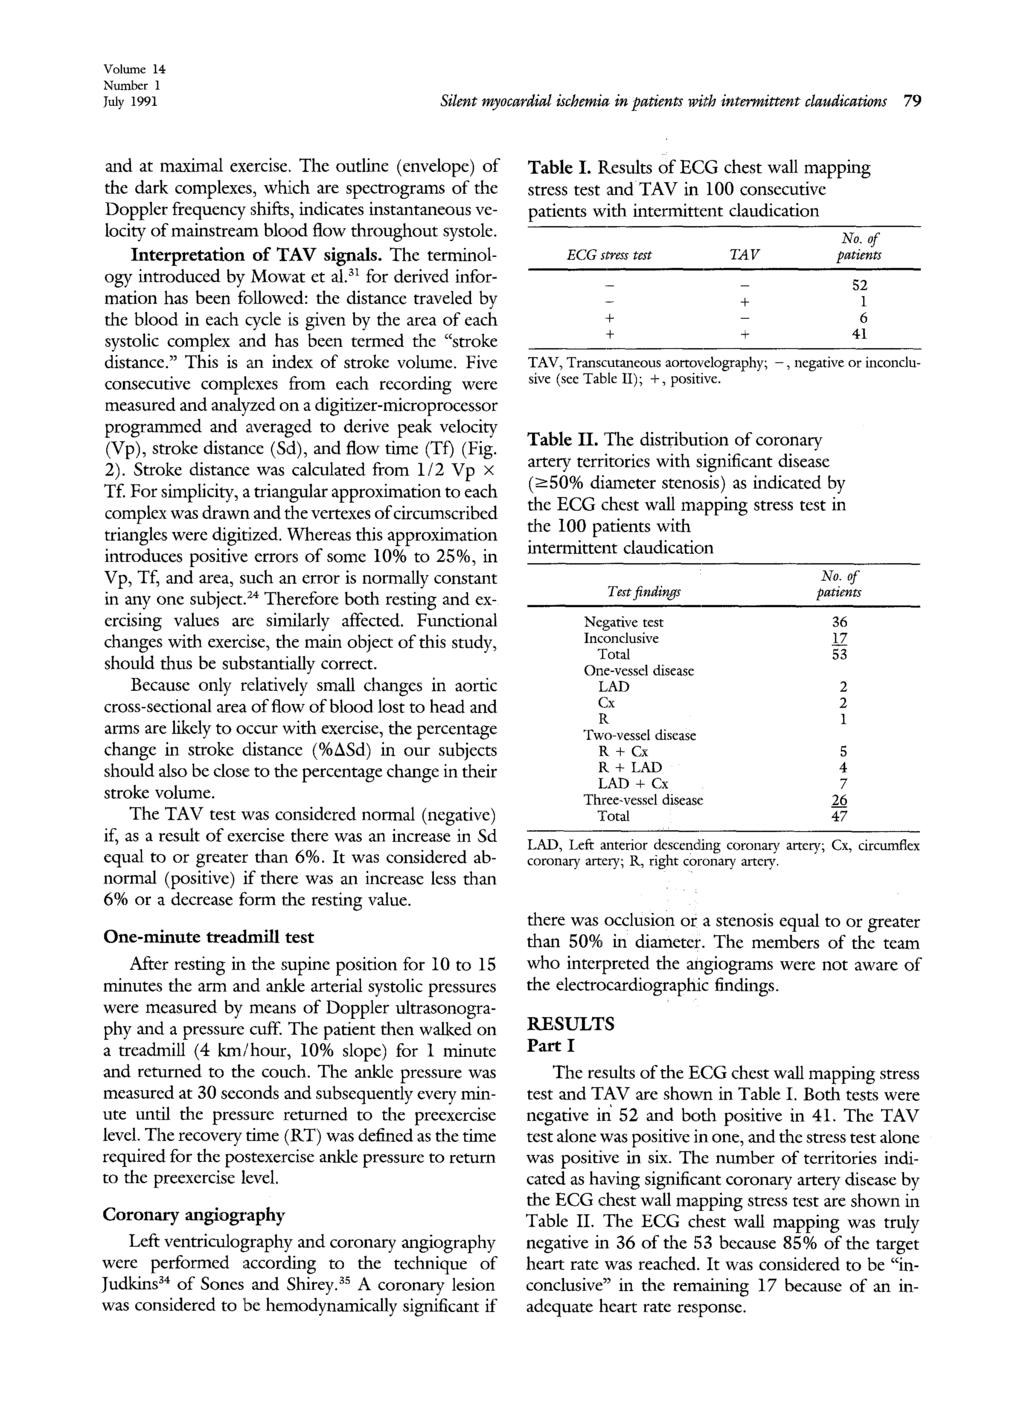 Volume 14 Number 1 July 1991 Silent myocardial ischemia in patients with intermittent claudications 79 and at maximal exercise.